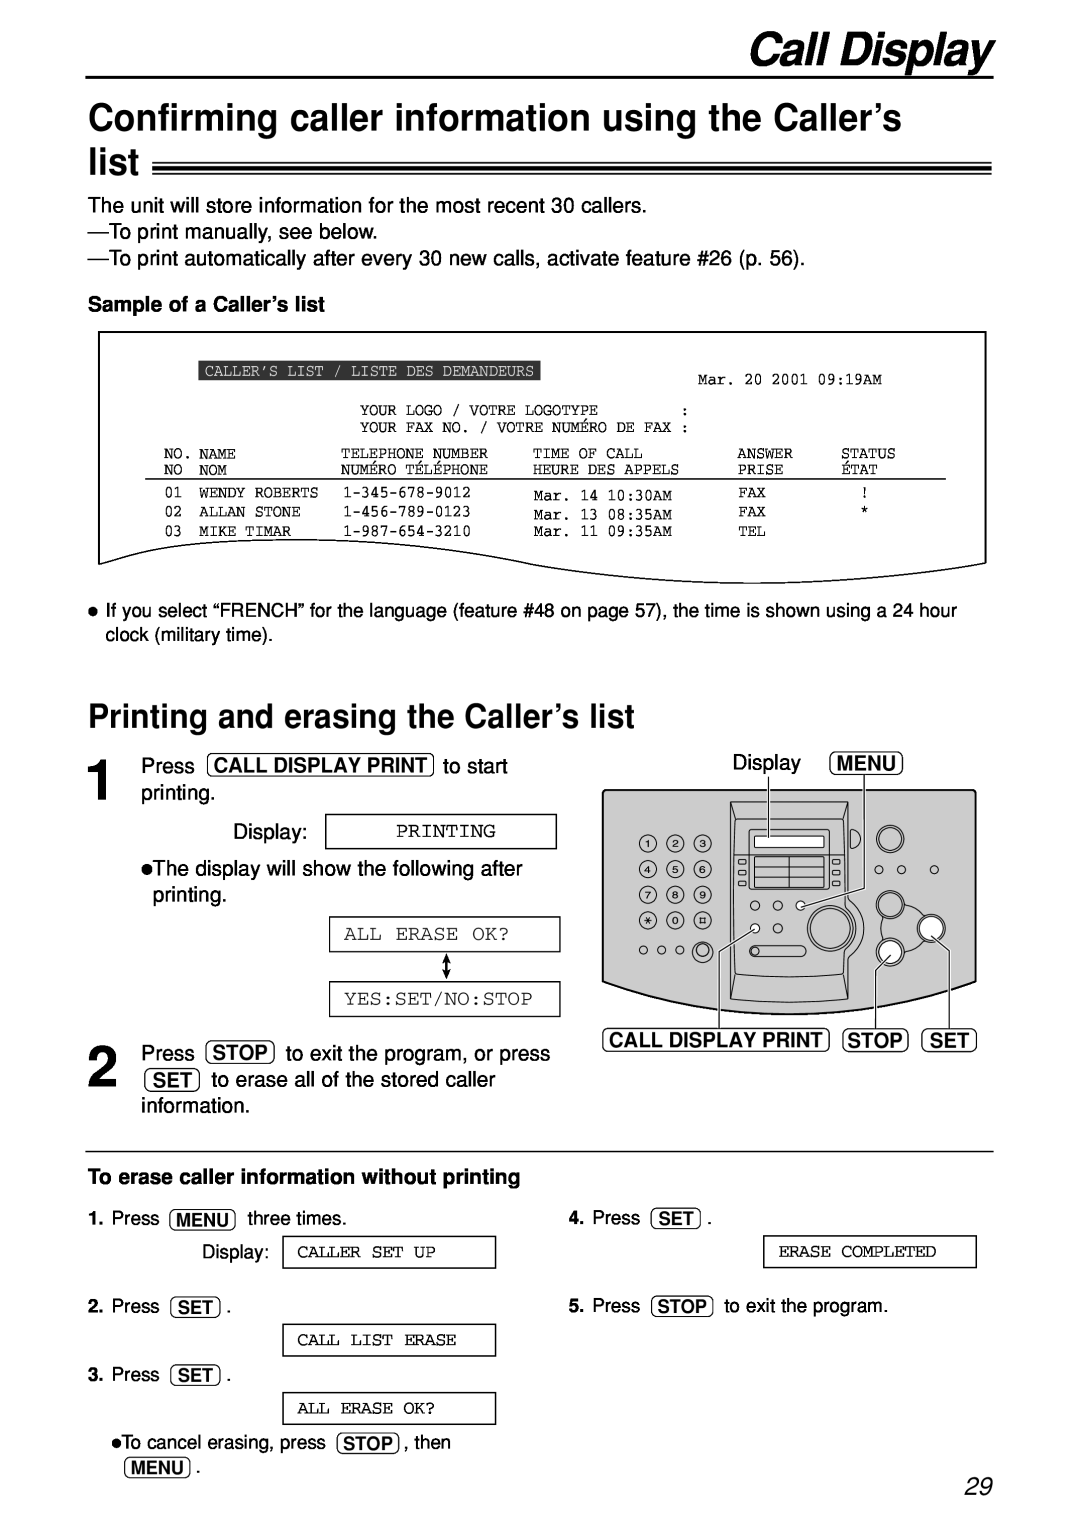 Panasonic KX-FL501C manual Confirming caller information using the Caller’s list, Printing and erasing the Caller’s list 